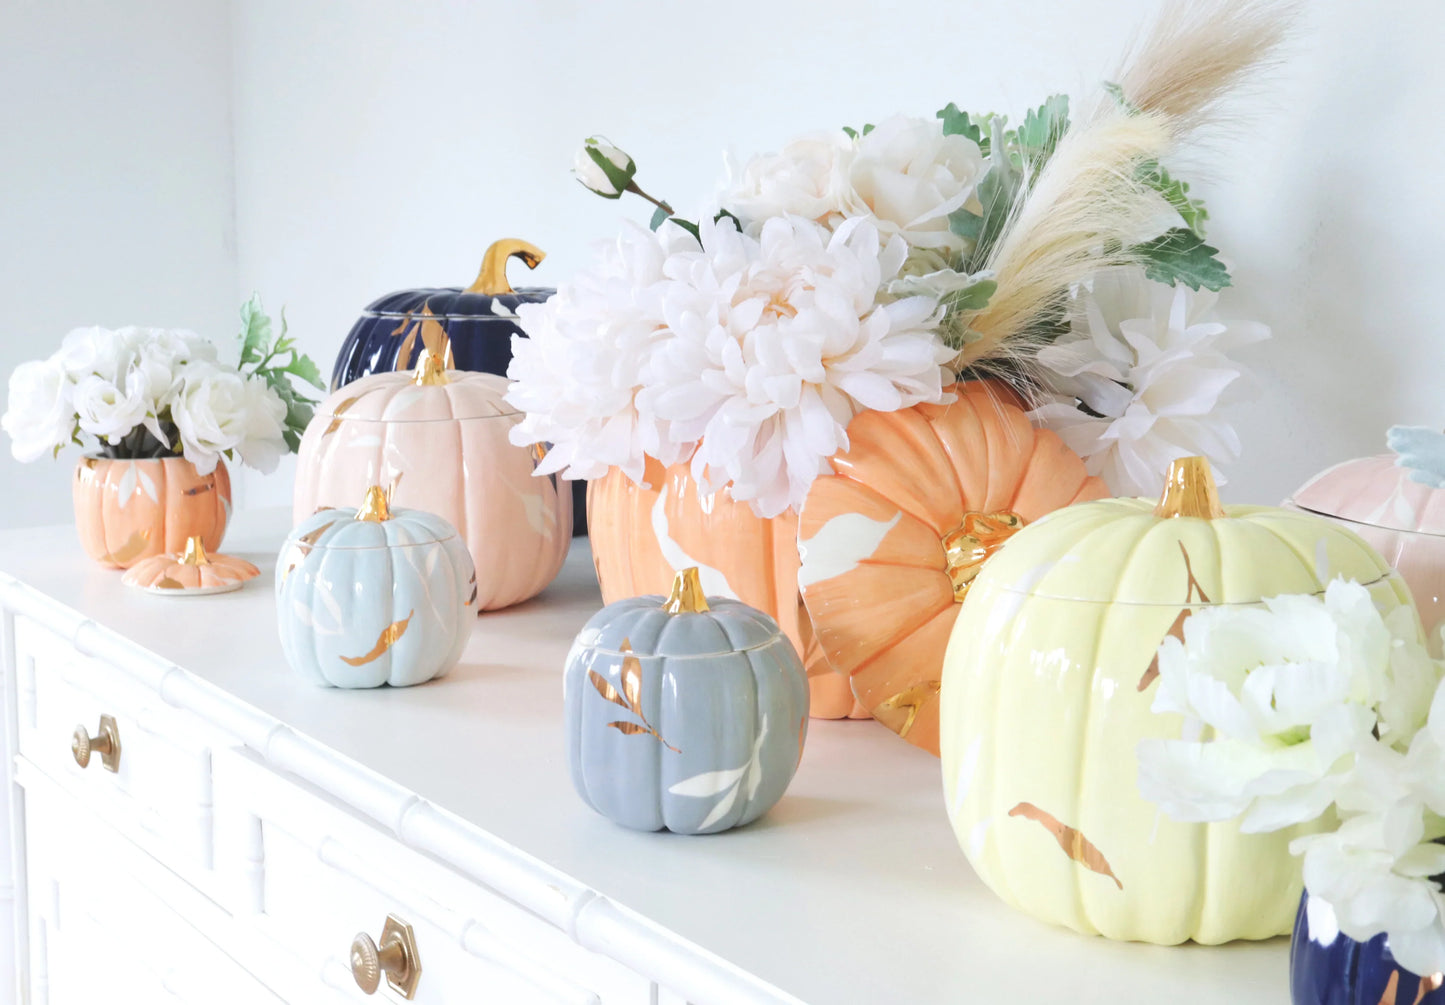 Layered Leaves Pumpkin Jars with 22K Gold Accents in Blush | Wholesale